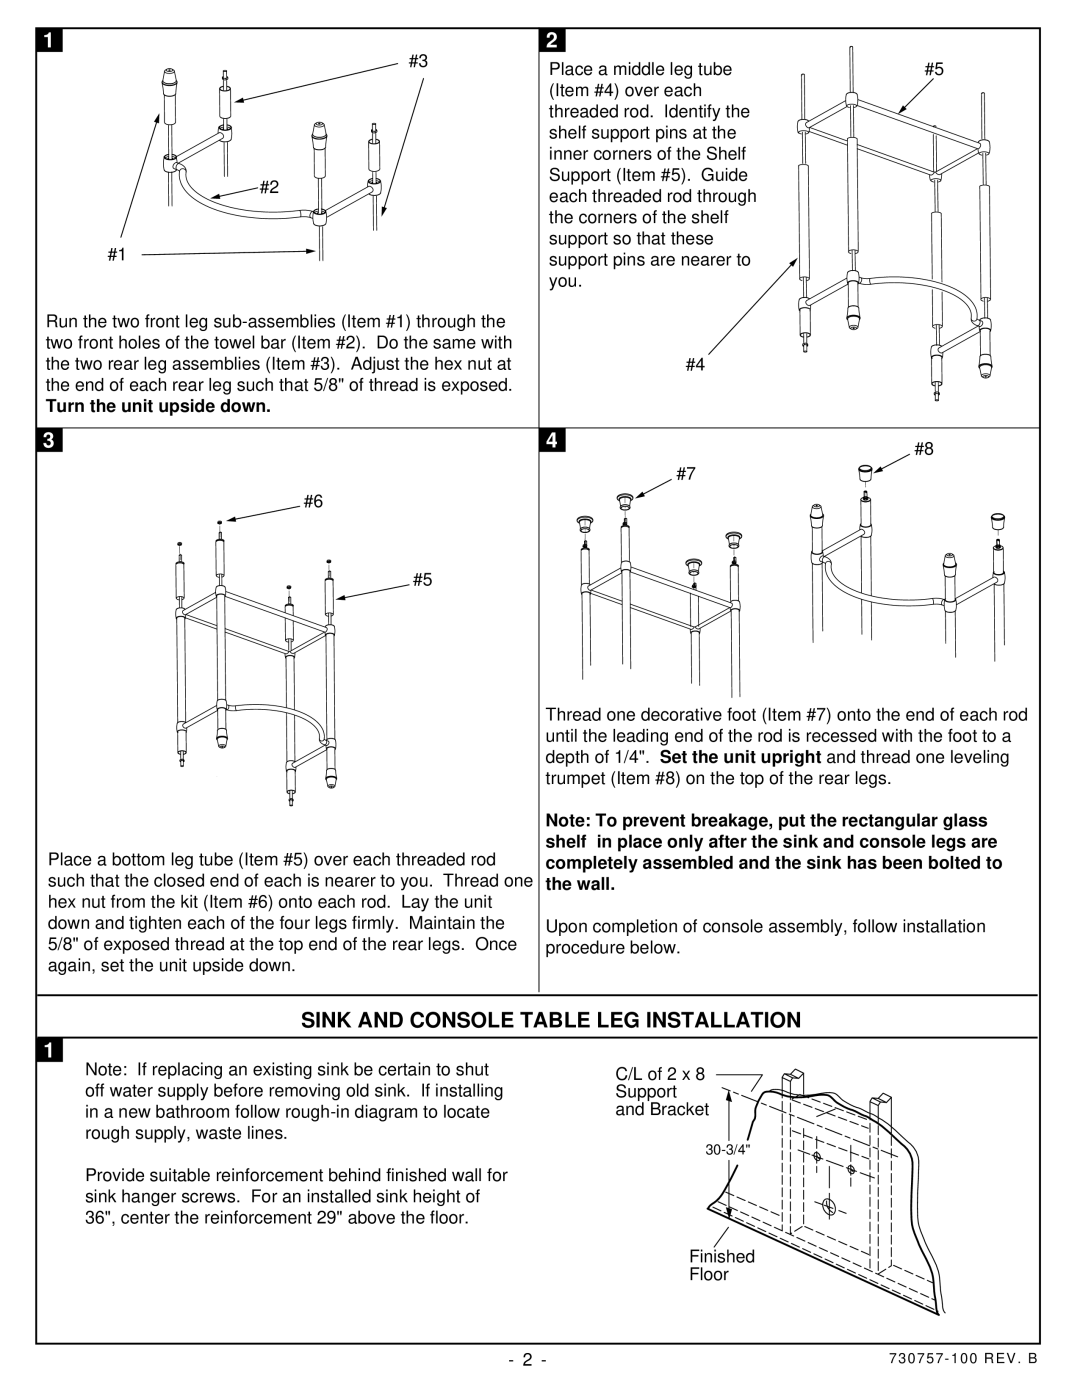 American Standard 7812.295, 7812.002 installation instructions Sink And Console Table Leg Installation 